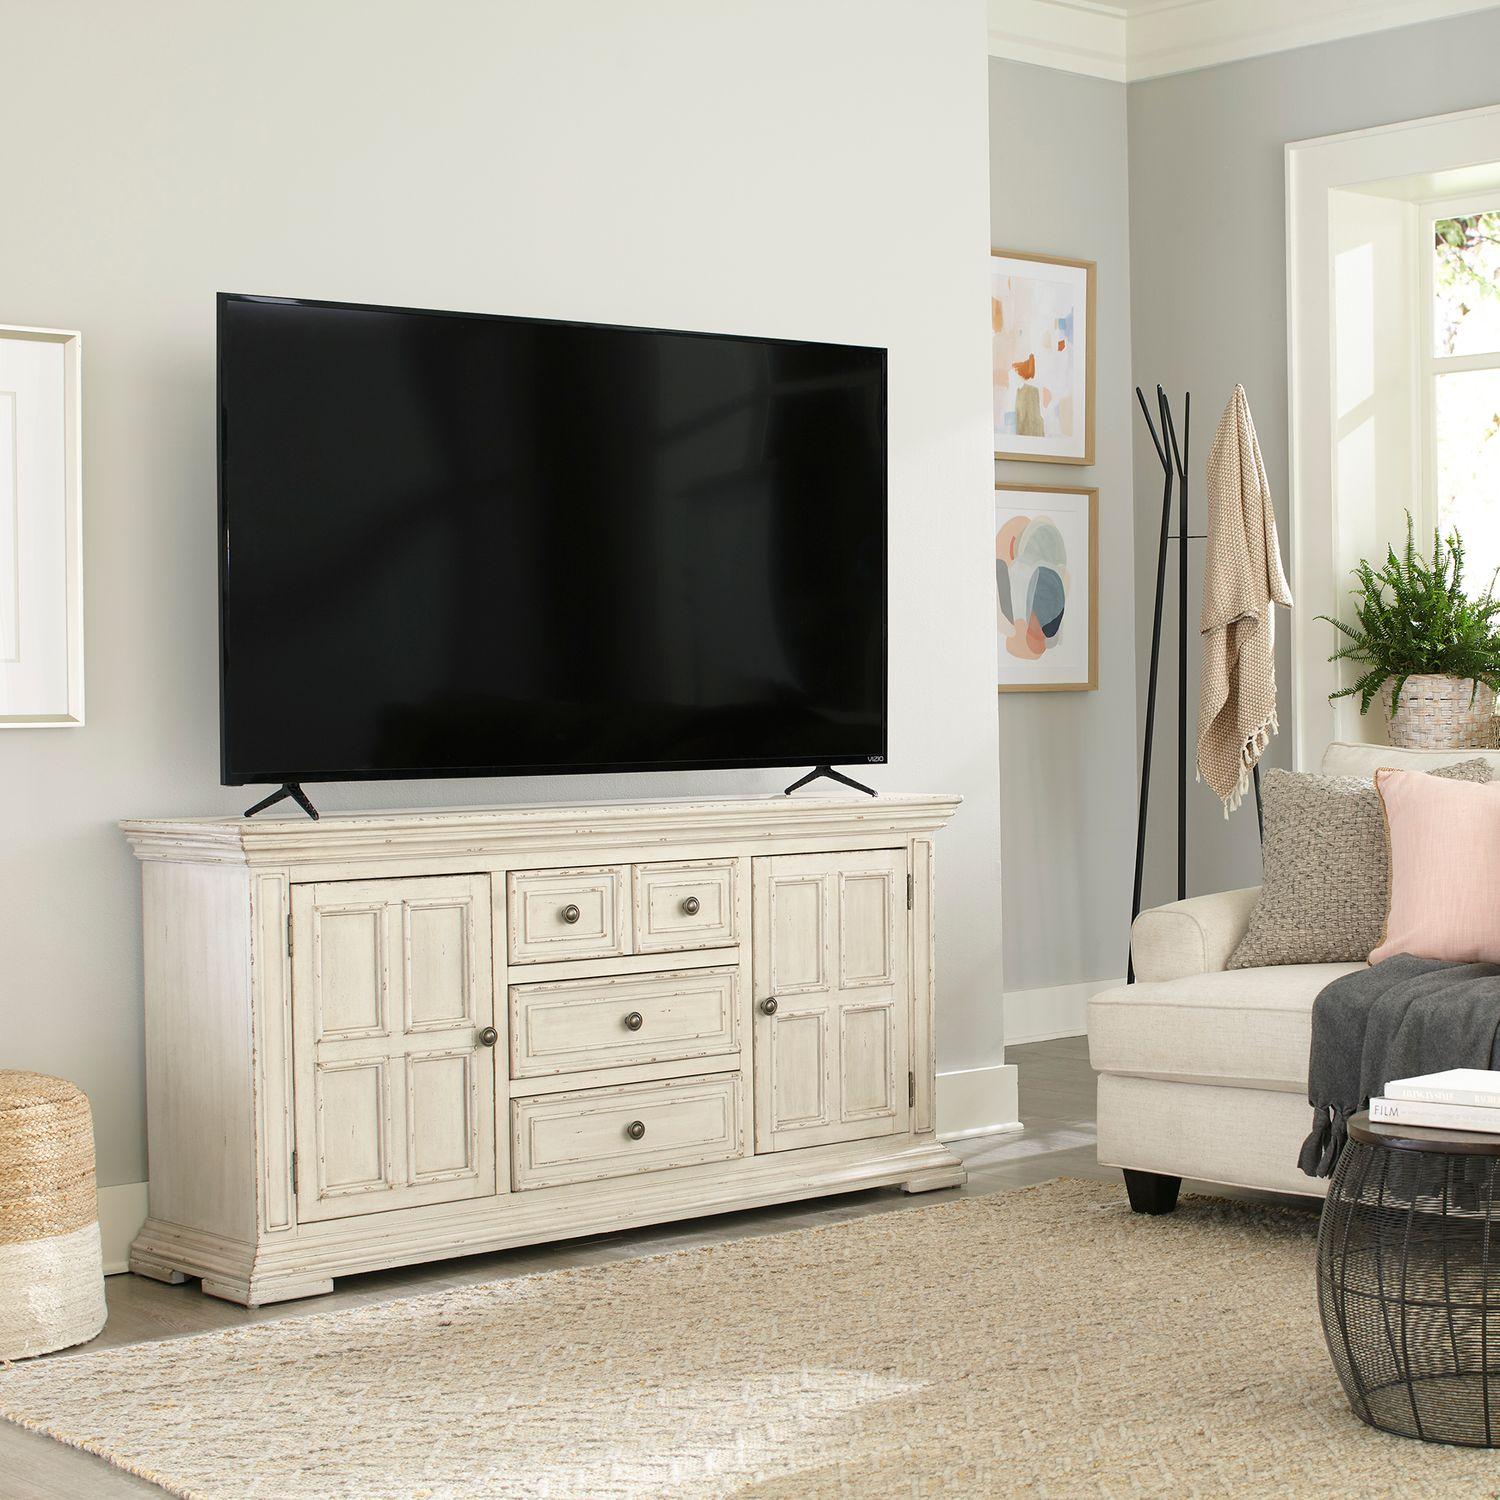 Transitional Tv Console Big Valley 361W-TV66 361W-TV66 in White 